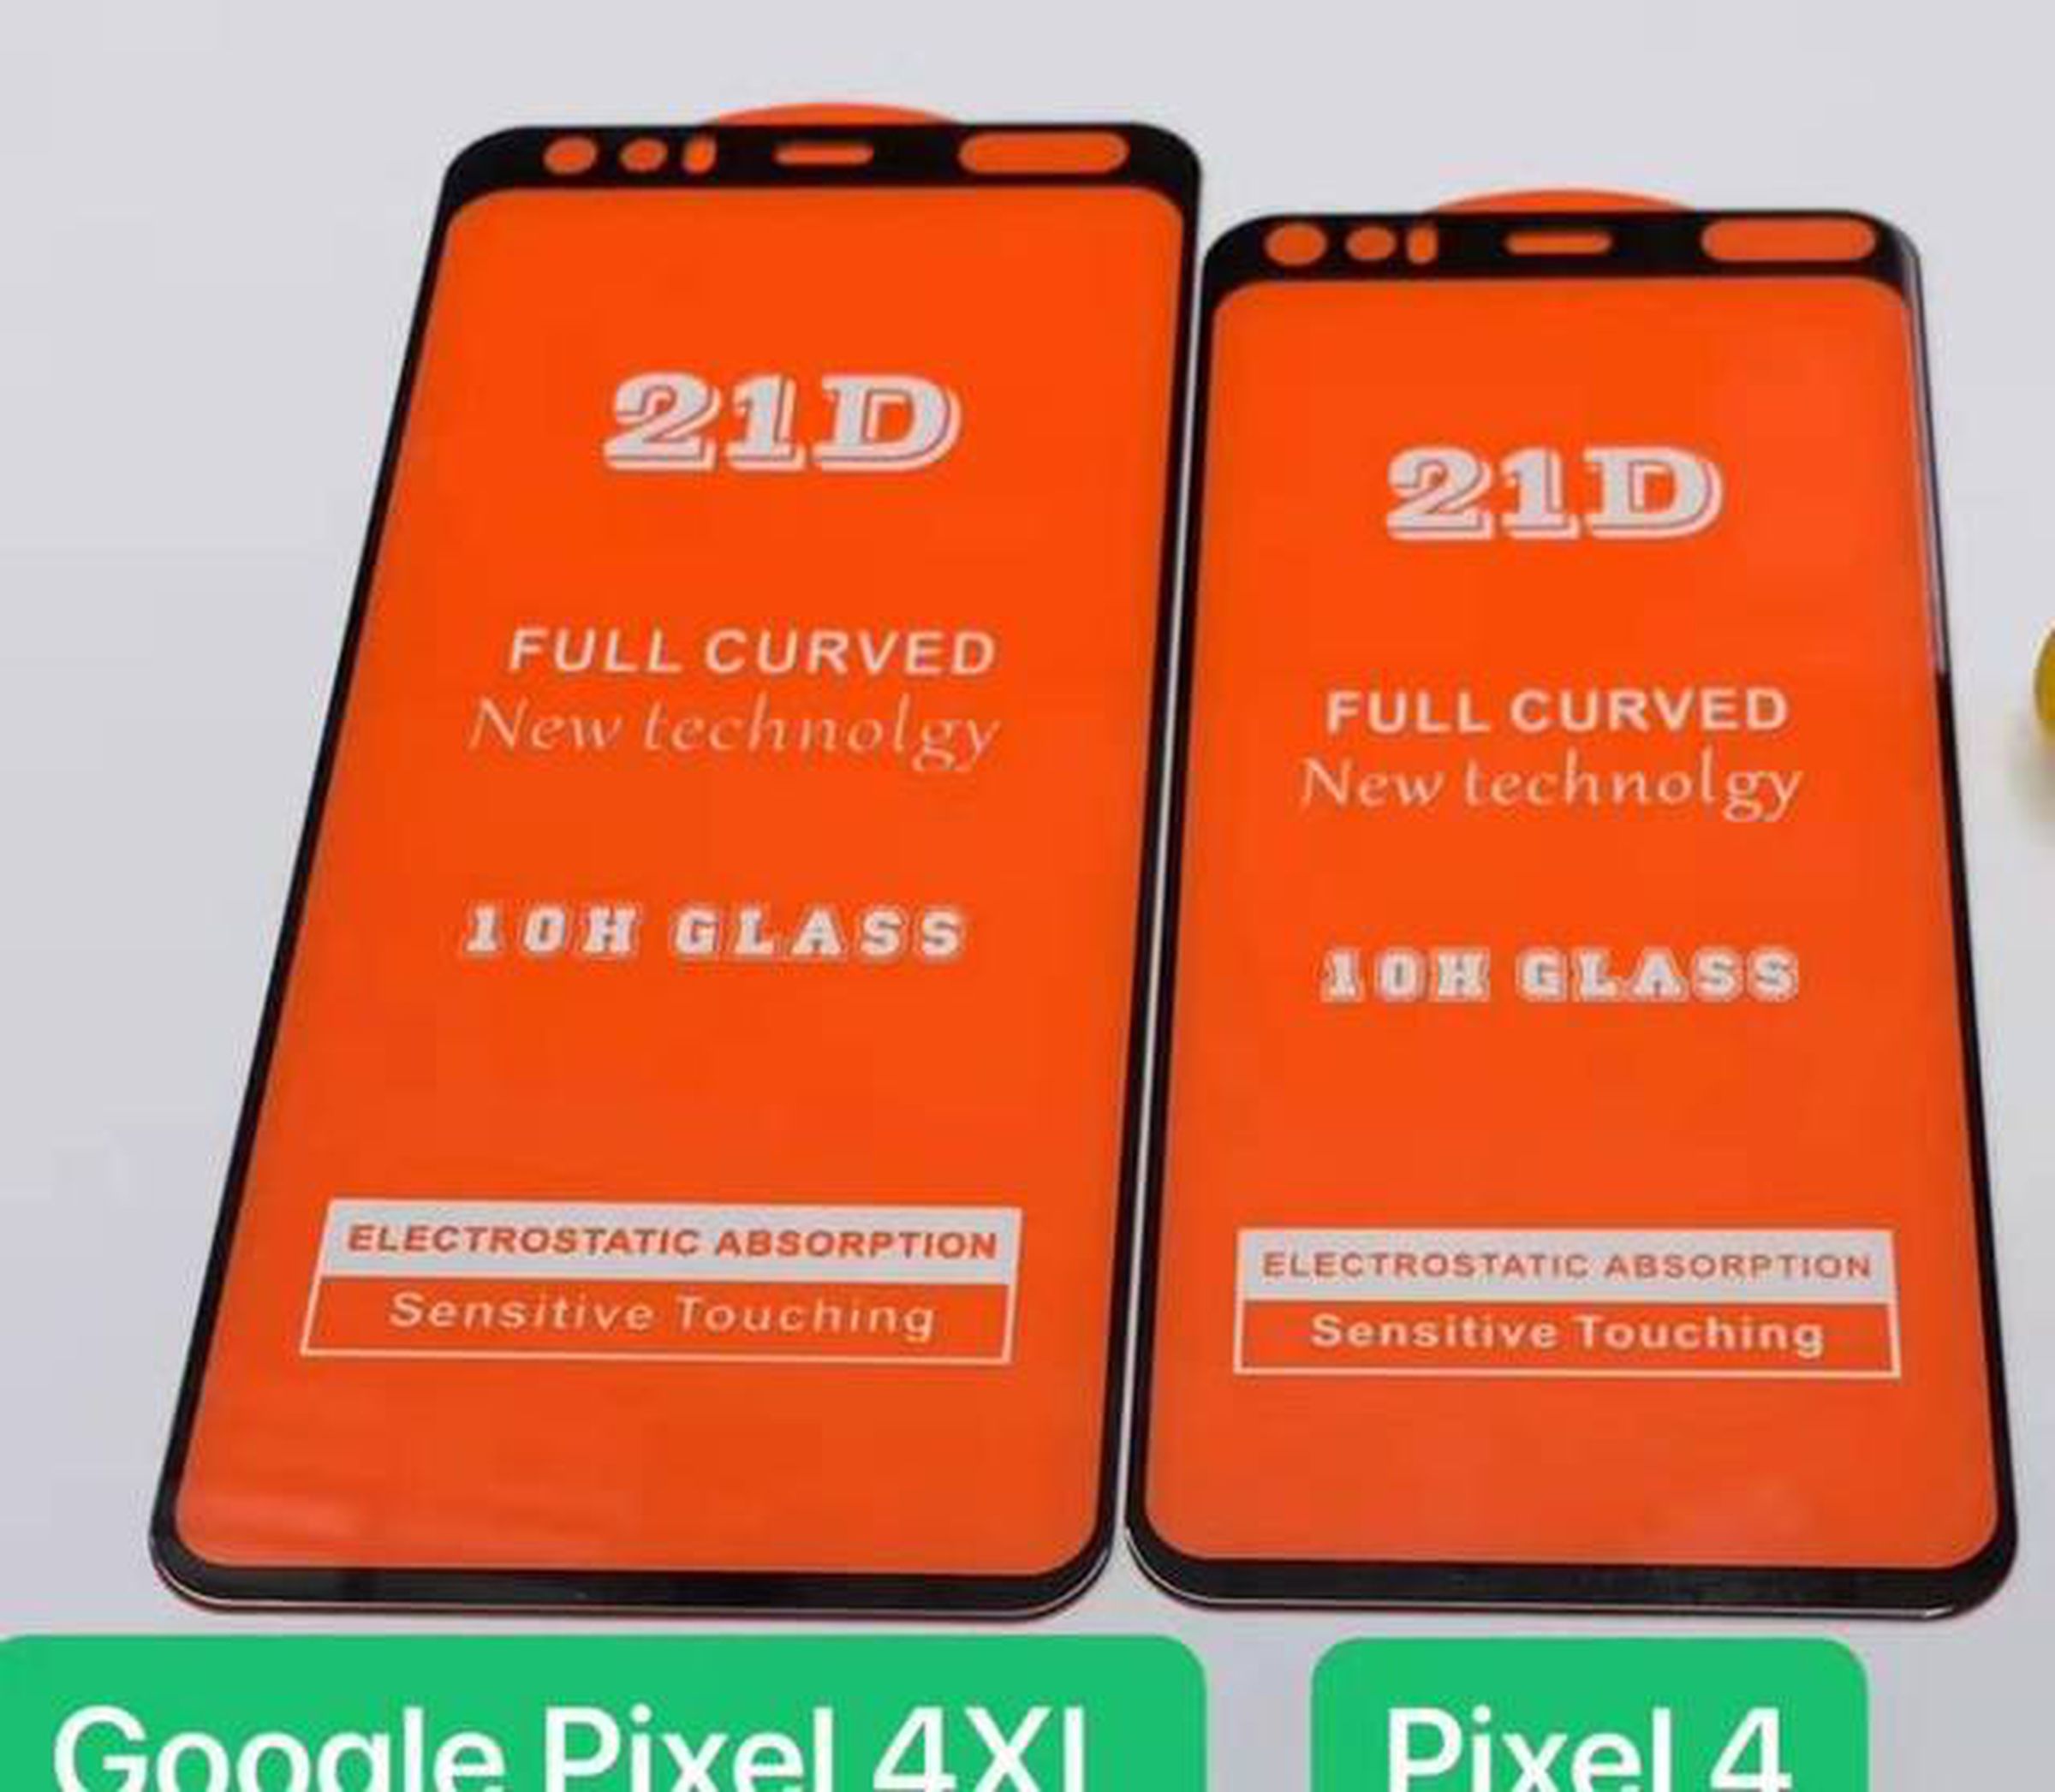 A leaked image of the front glass on the Pixel 4